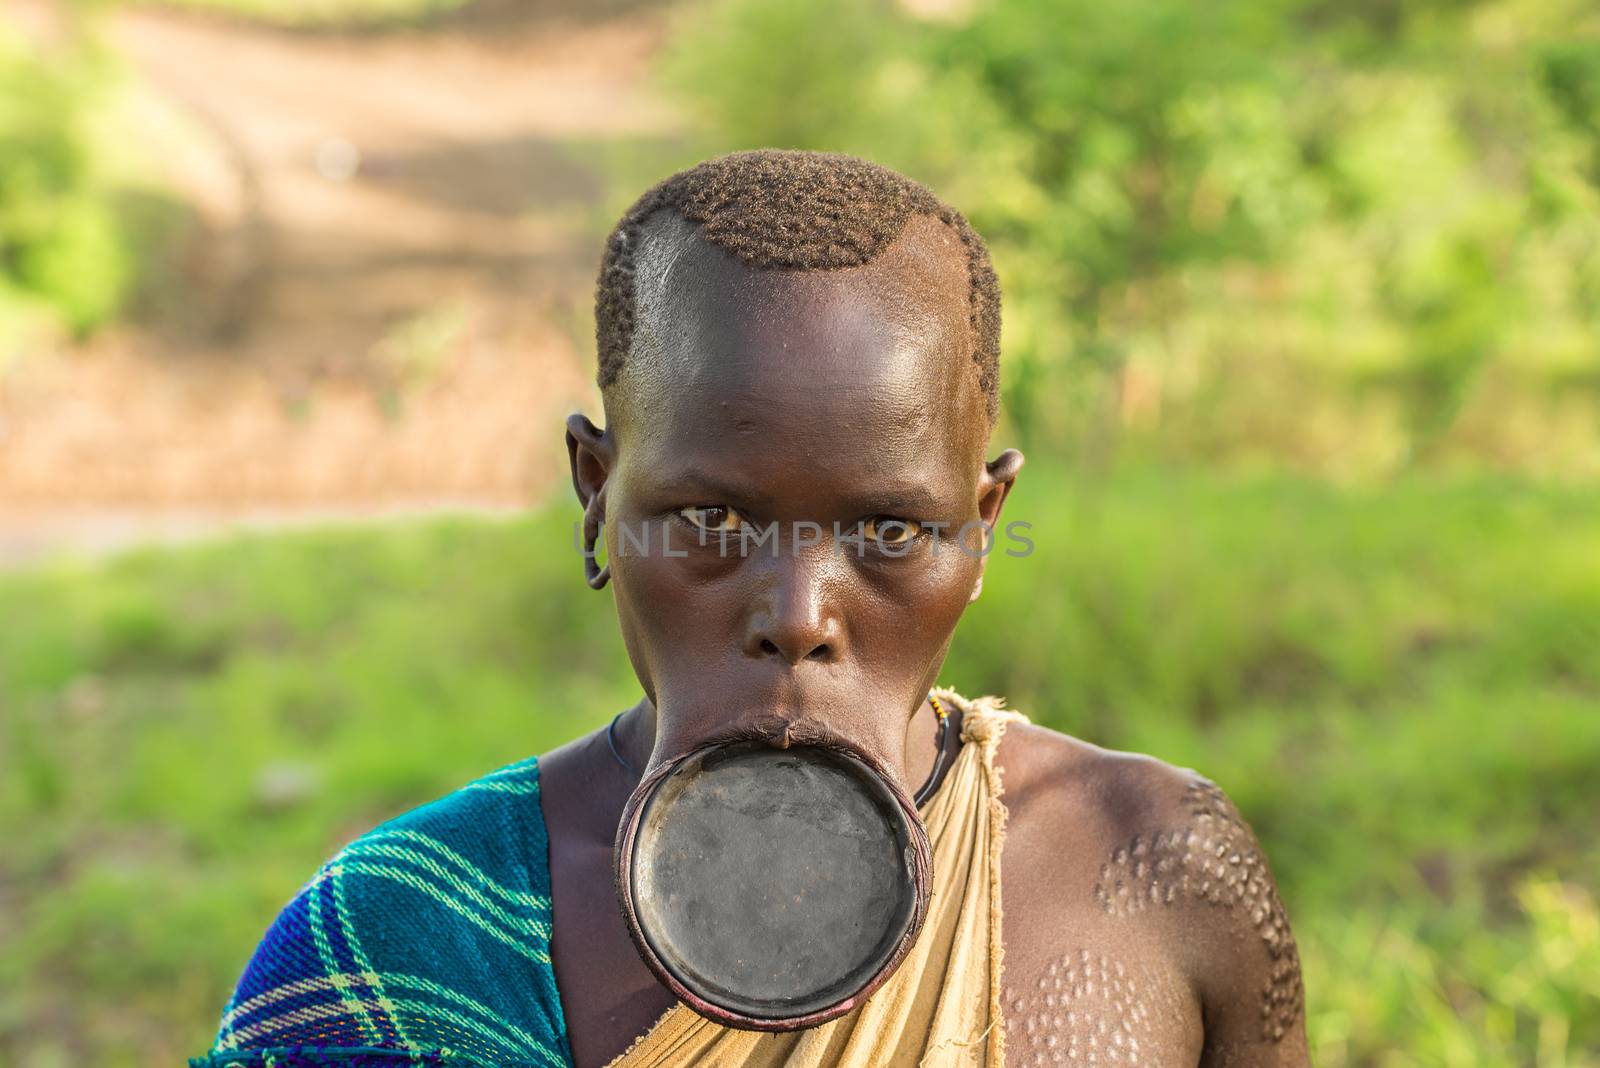 Woman from the African tribe Surma with big lip plate by nickfox